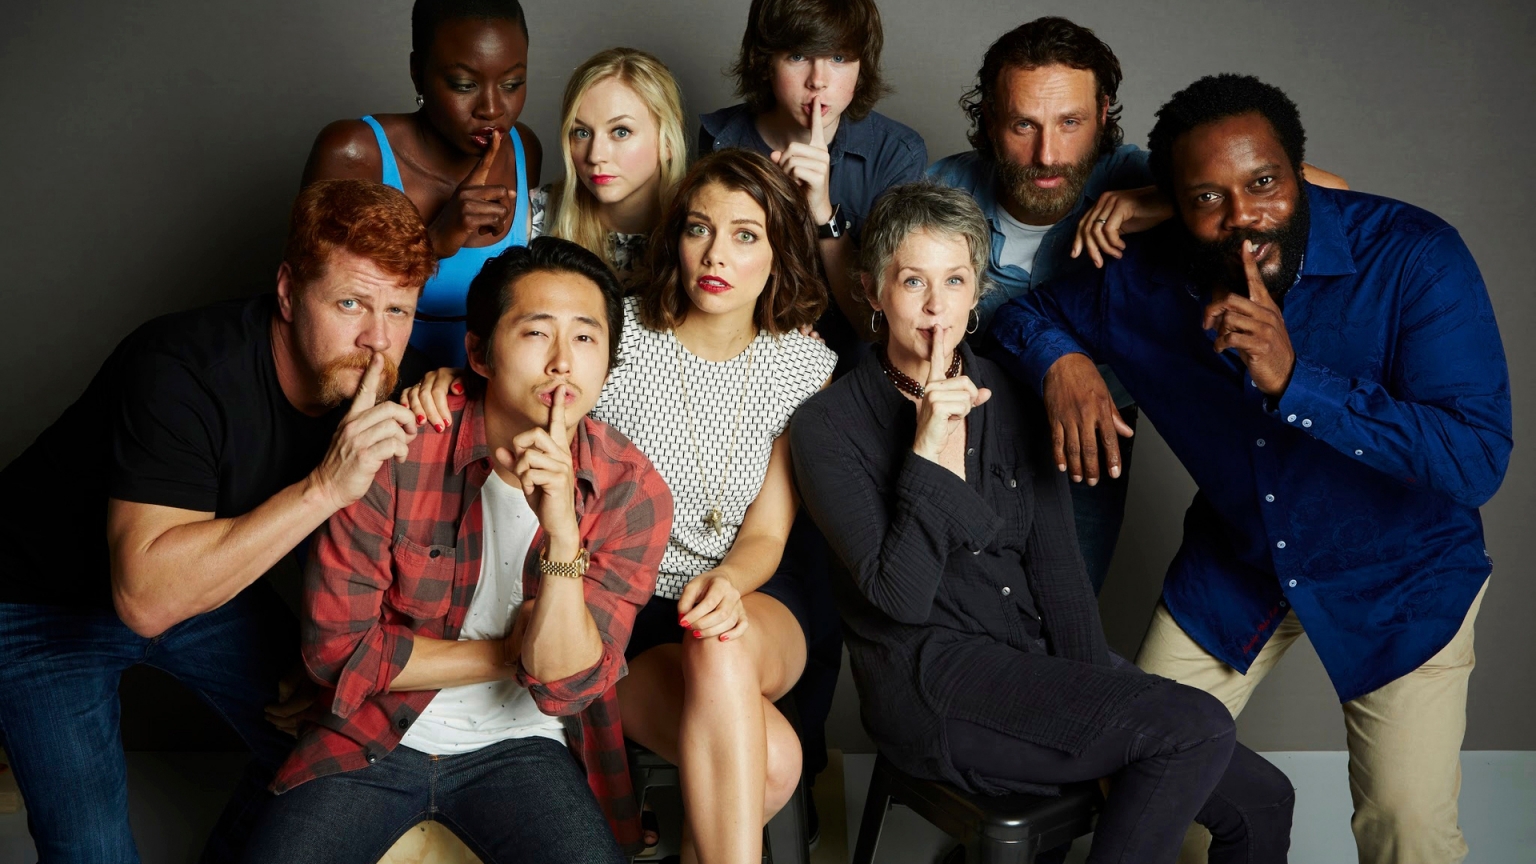 The Walking Dead Actors for 1536 x 864 HDTV resolution